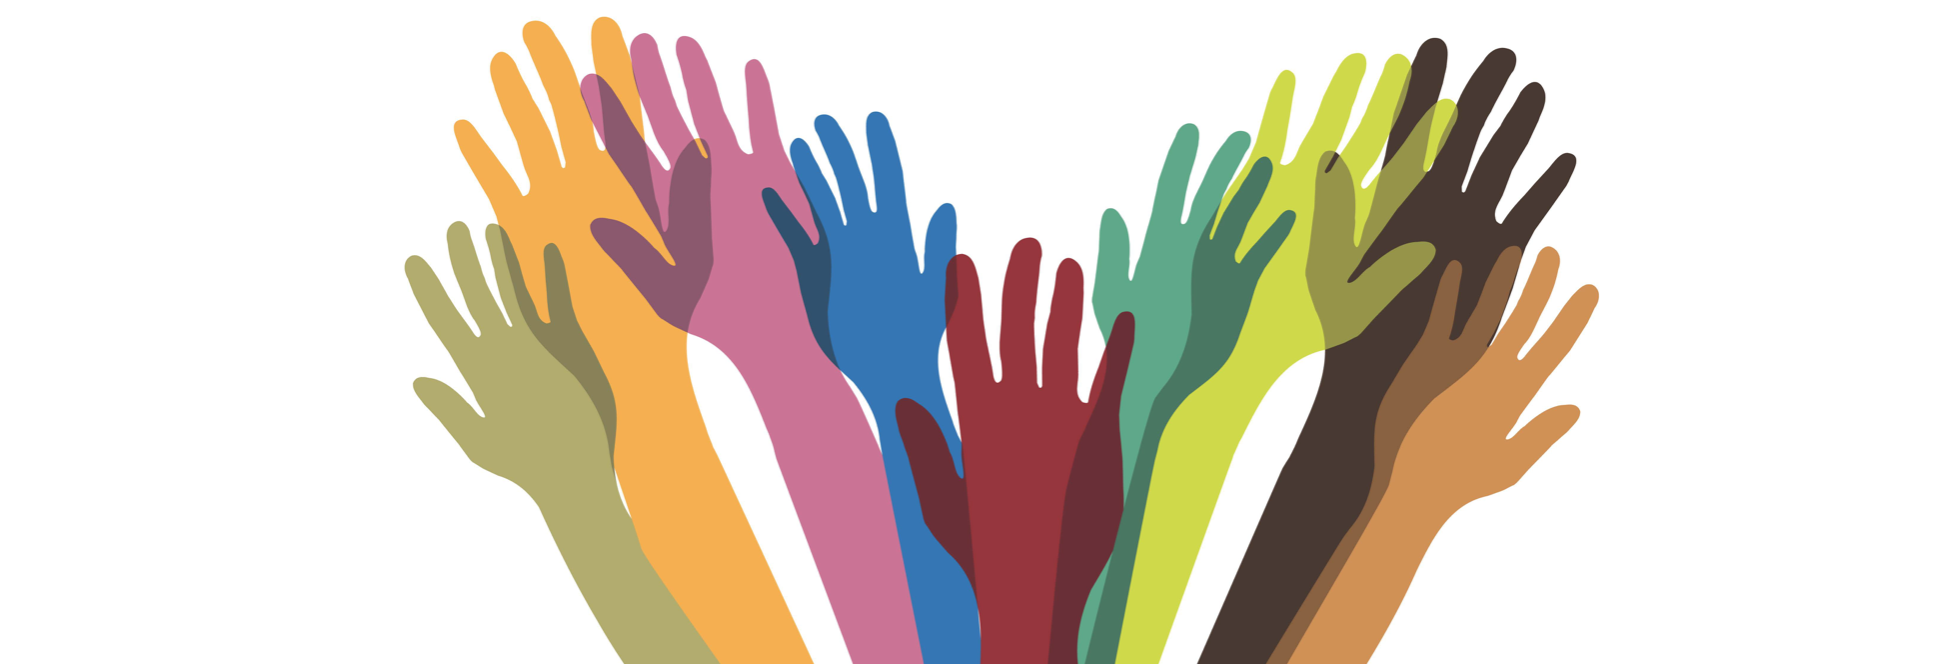 Inclusion and diversity: how to meet great expectations